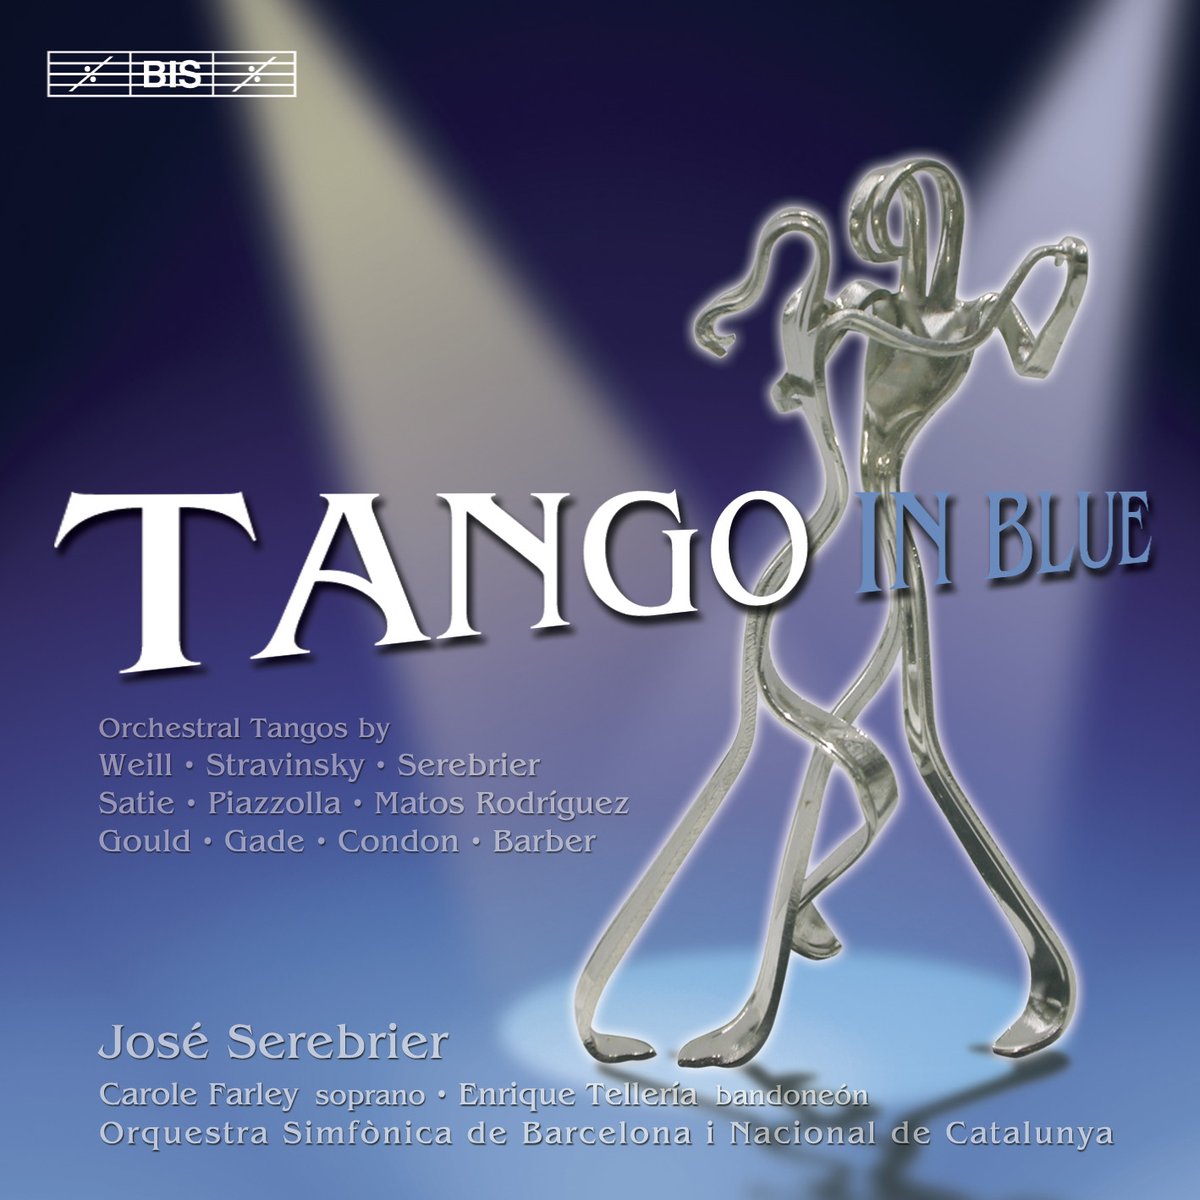 Join us for a Tuesday Tango in Blue, with Maestro Jose Serebrier & the Barcelona Symphony Orchestra 🎧Listen here! bisrecords.lnk.to/1175 @JOSESEREBRIER @carolefarley @auditoribcn #tango #classical #Maestro